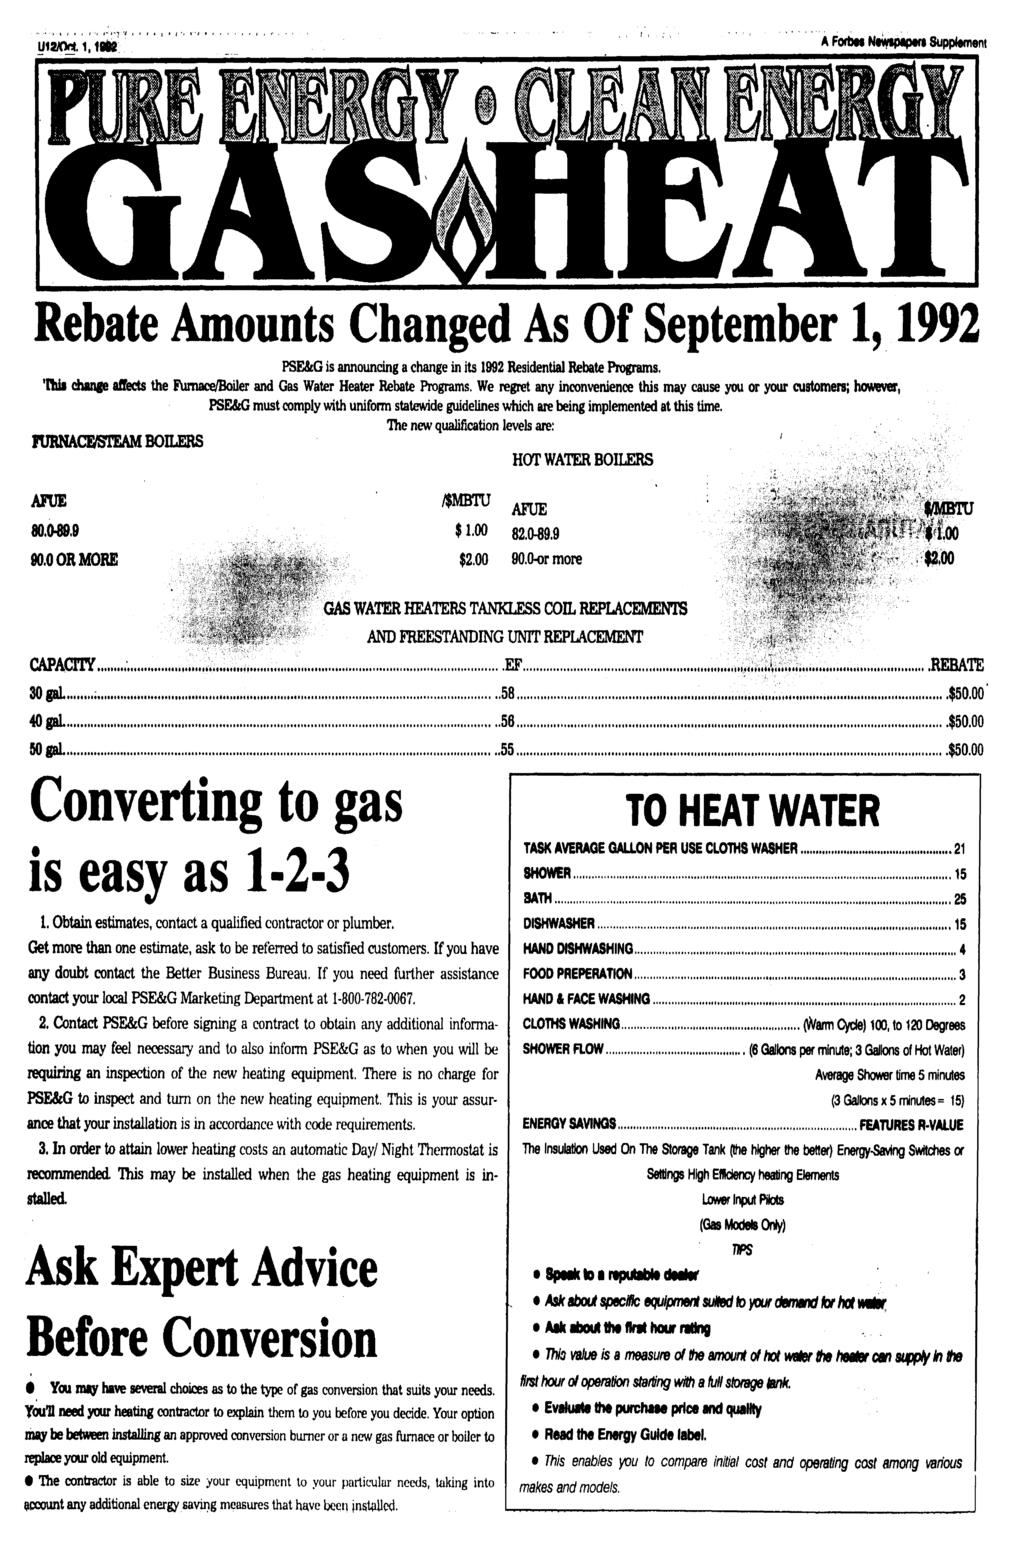 1,1*2 A ForbM Ntimpaperi Supplement Rebate Amounts Changed As Of September 1,1992 PSE&G is announcing a change in its 1992 Residential Rebate Programs.